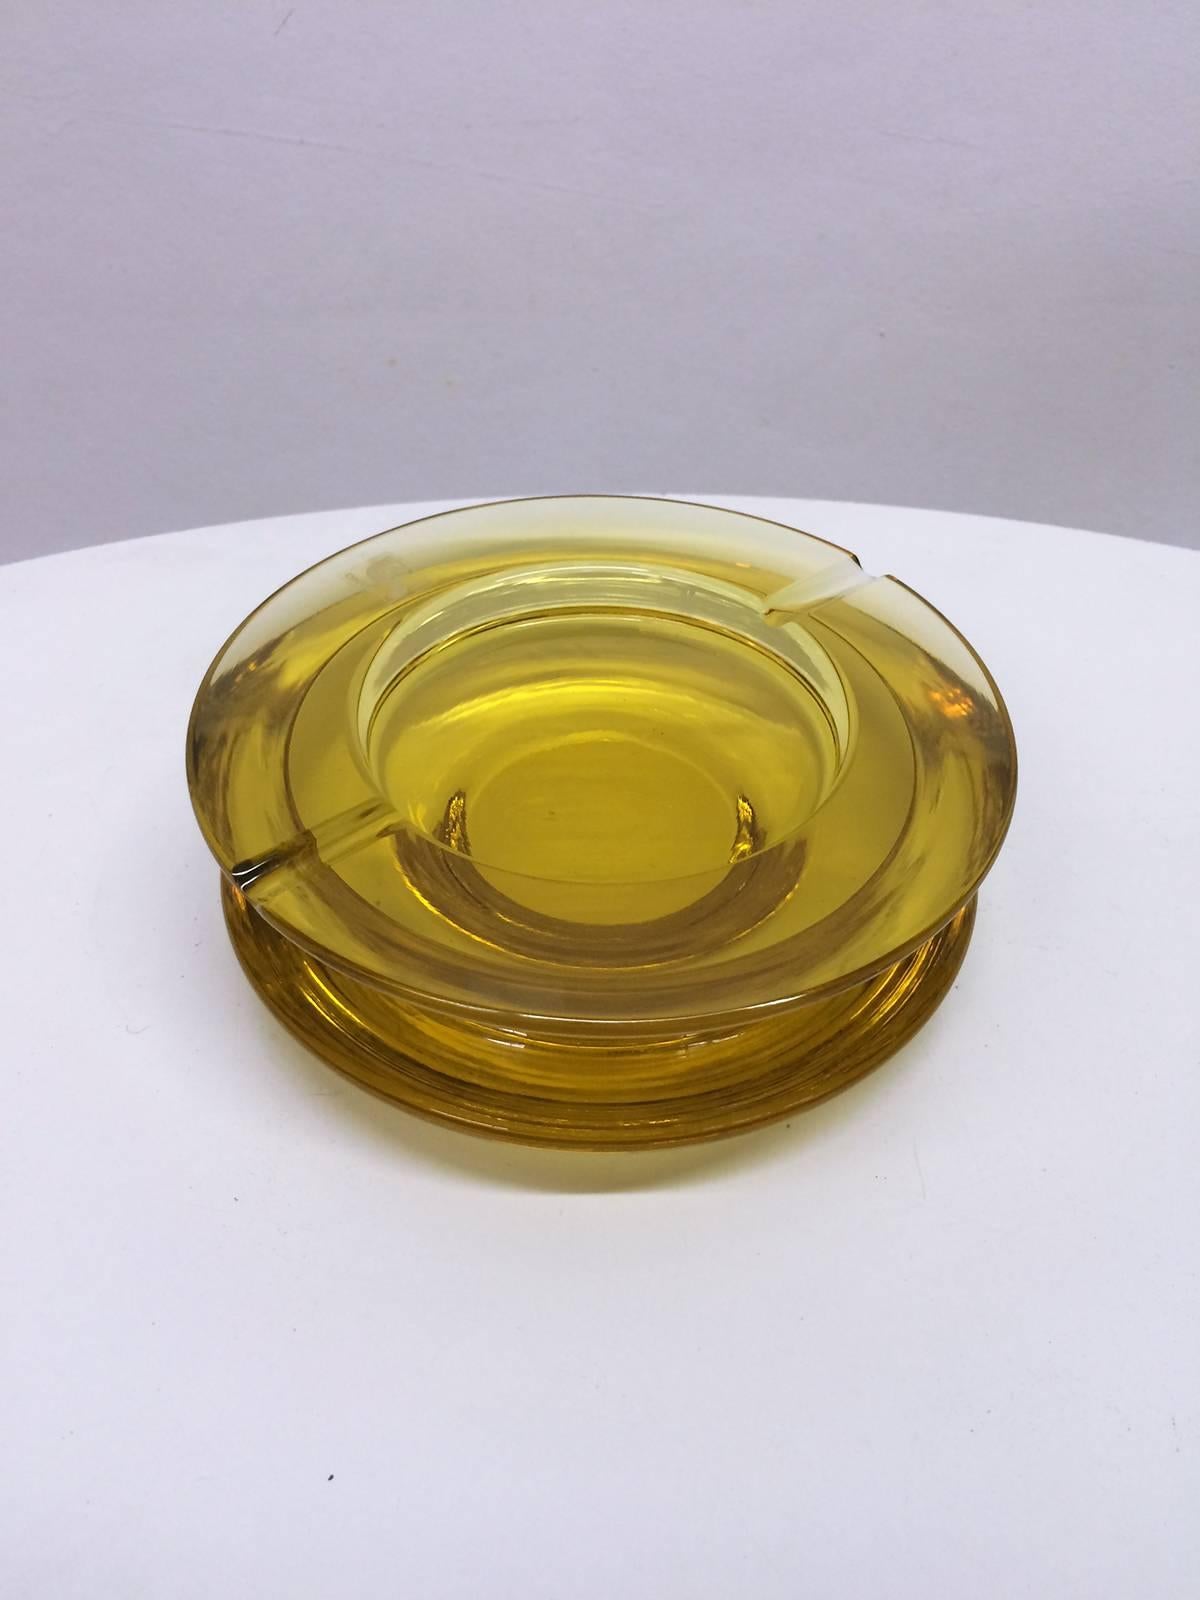 This is an original tinted glass ashtray designed and produced by the Italian glass and lighting company Murano. Very chic and modern feeling.
It wears the labels Murano Seguso.